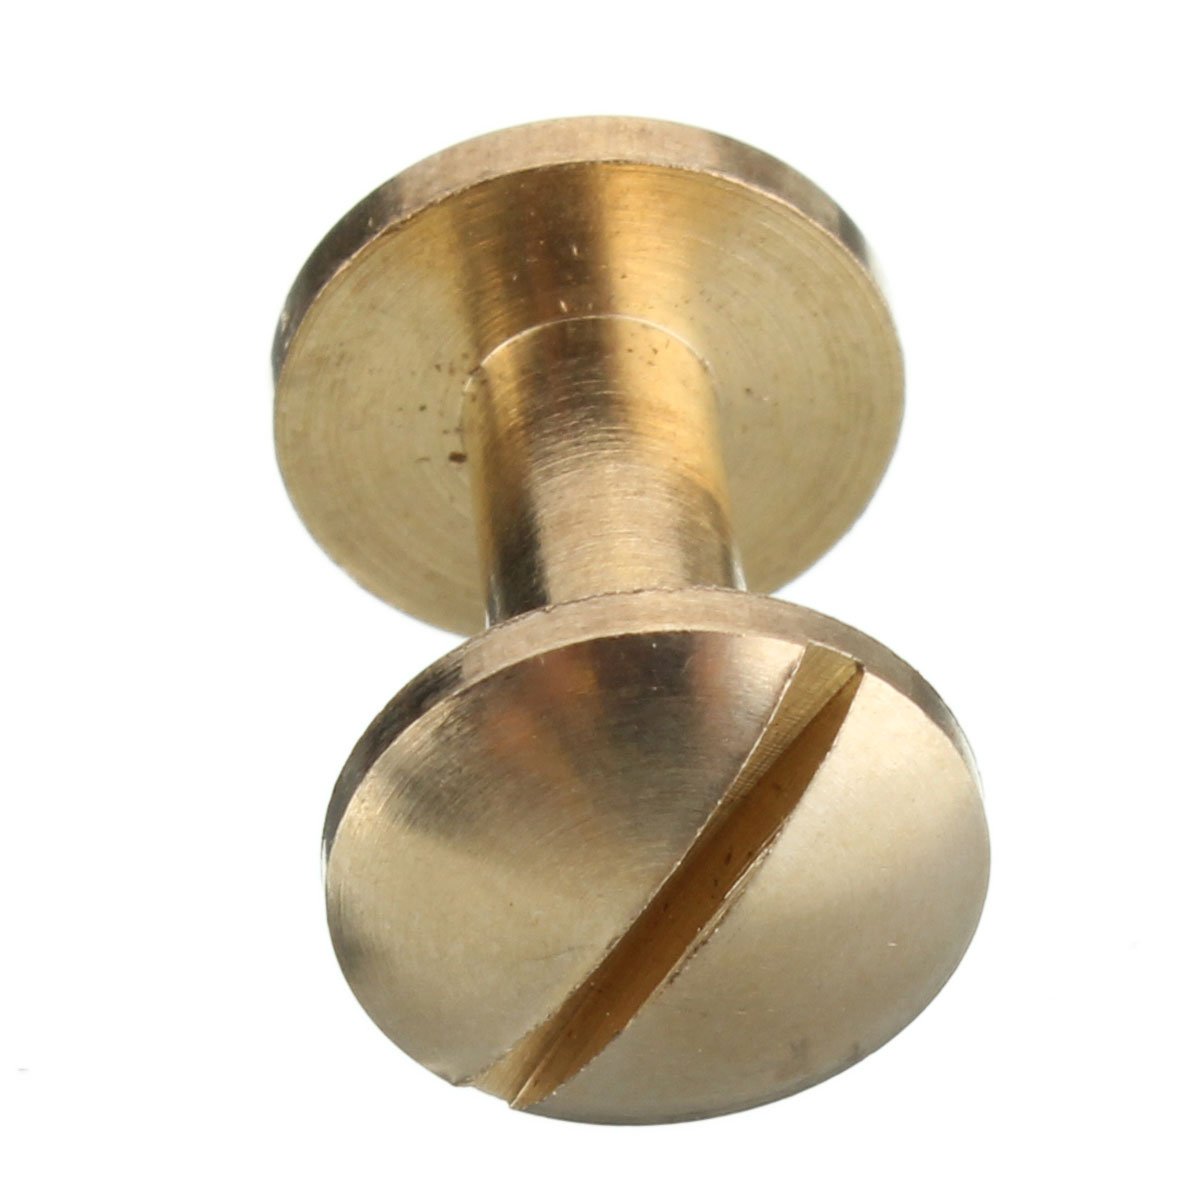 Solid-Brass-Arc-Button-Stud-Screw-Nail-4-15mm-Screw-Back-Leather-Belt-Button-Screws-1034256-5